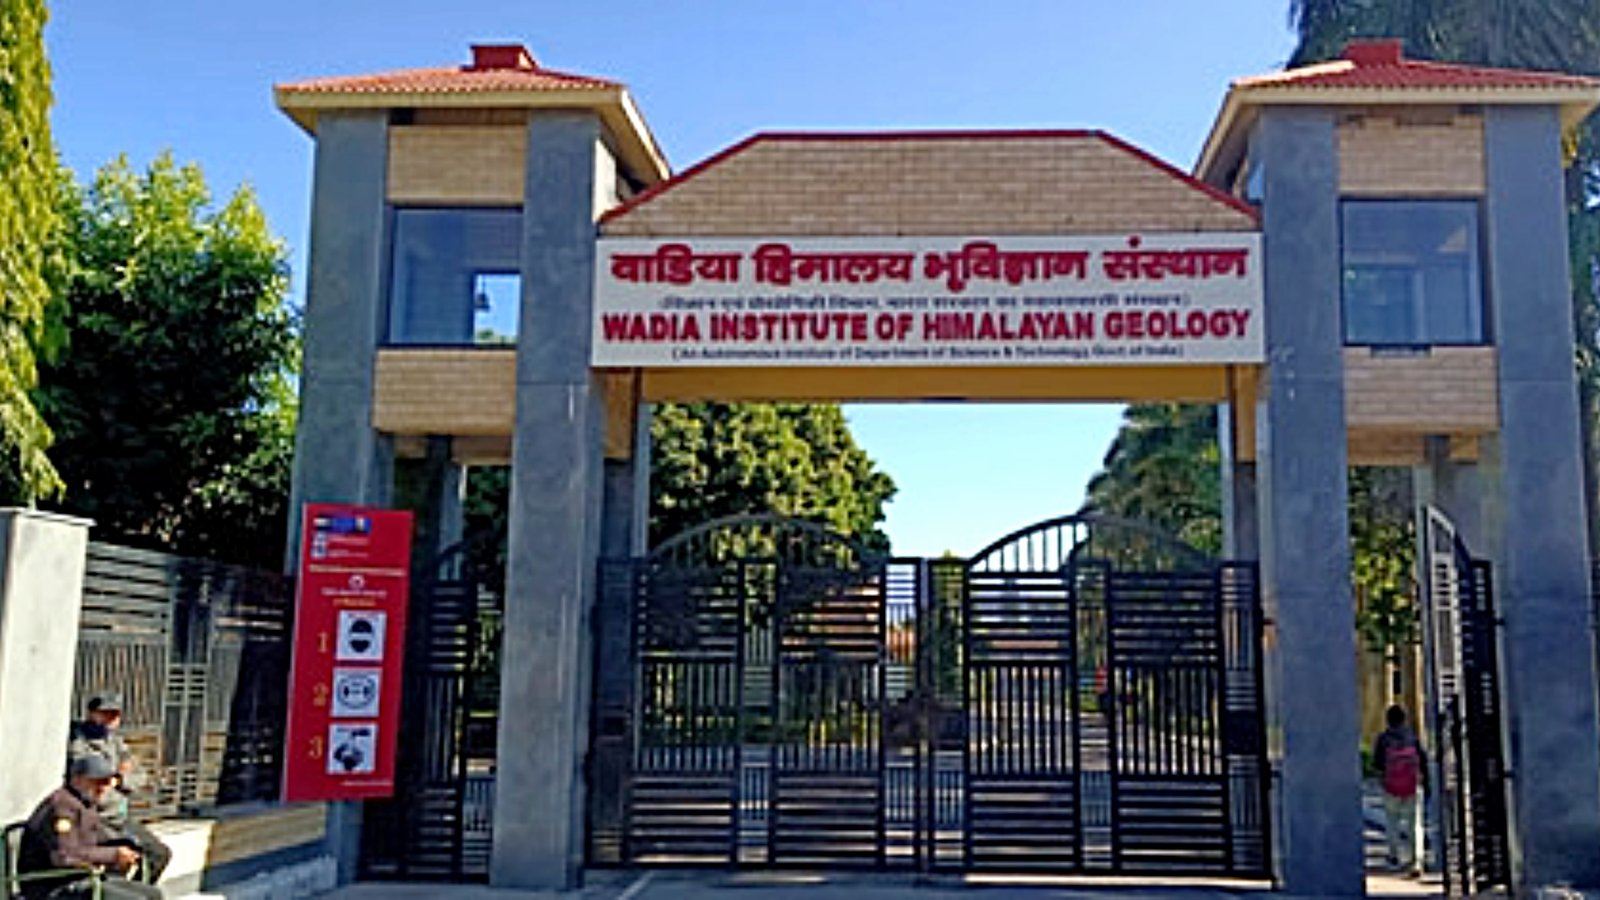 Wadia Institute of Himalayan Geology